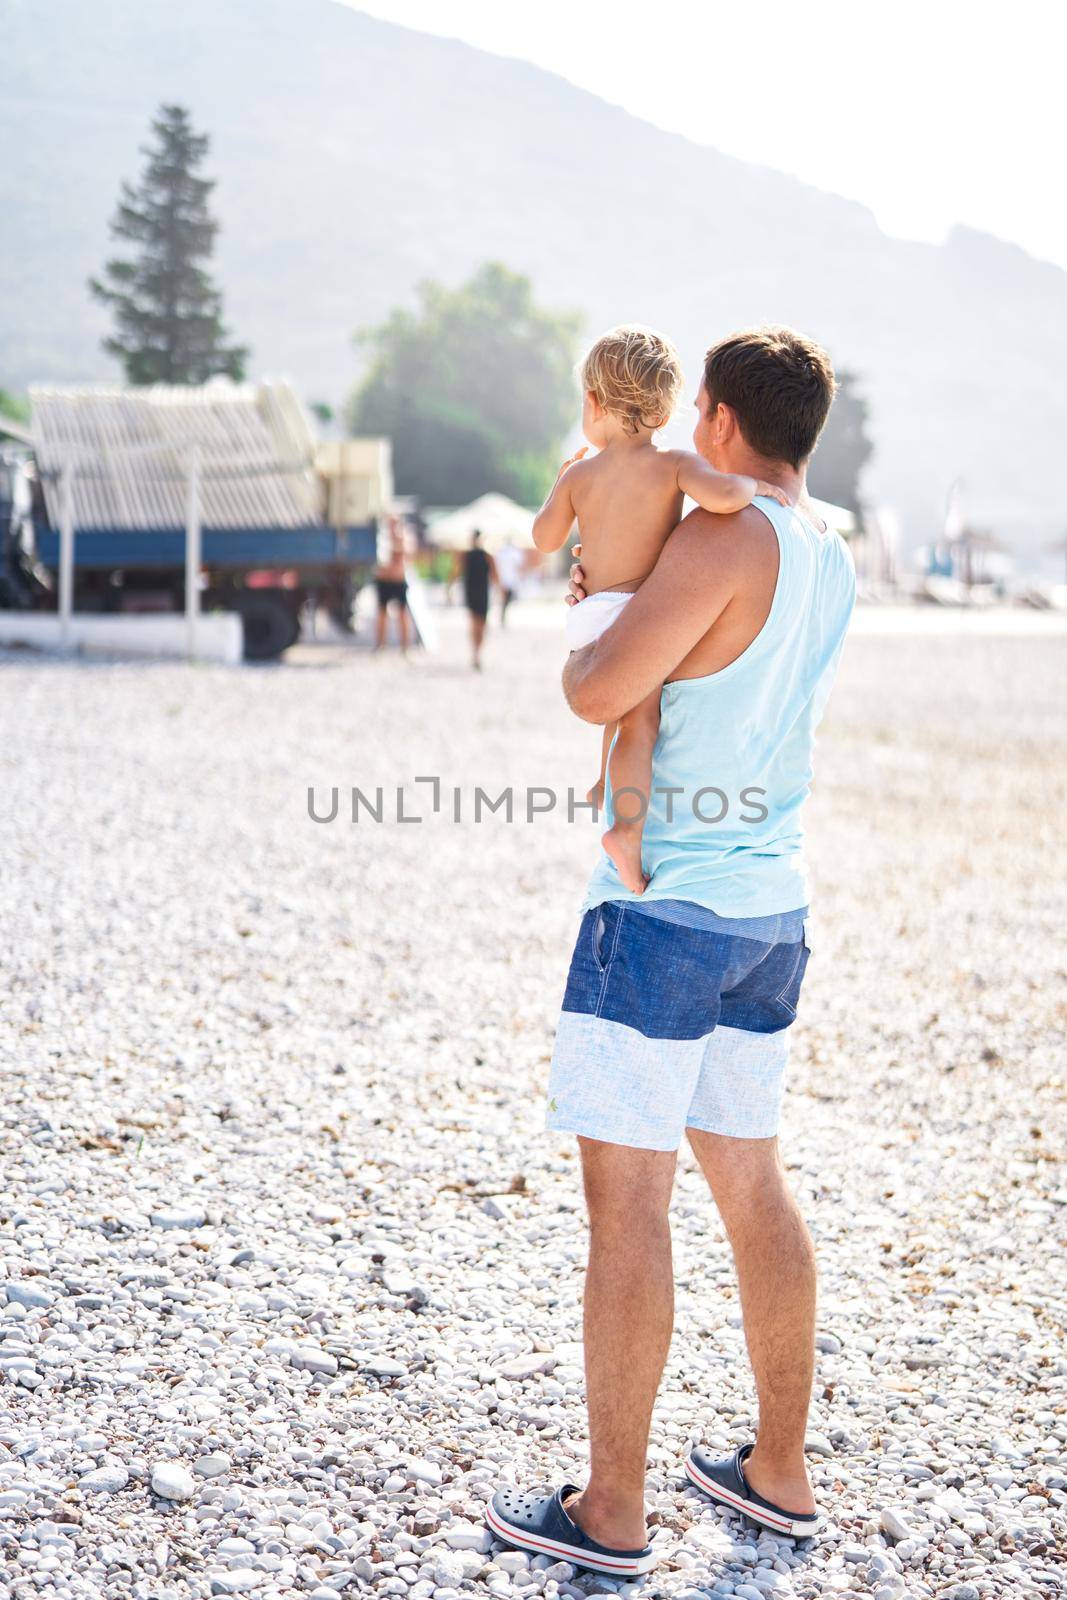 Dad with a little daughter in his arms stands on a pebble beach. High quality photo